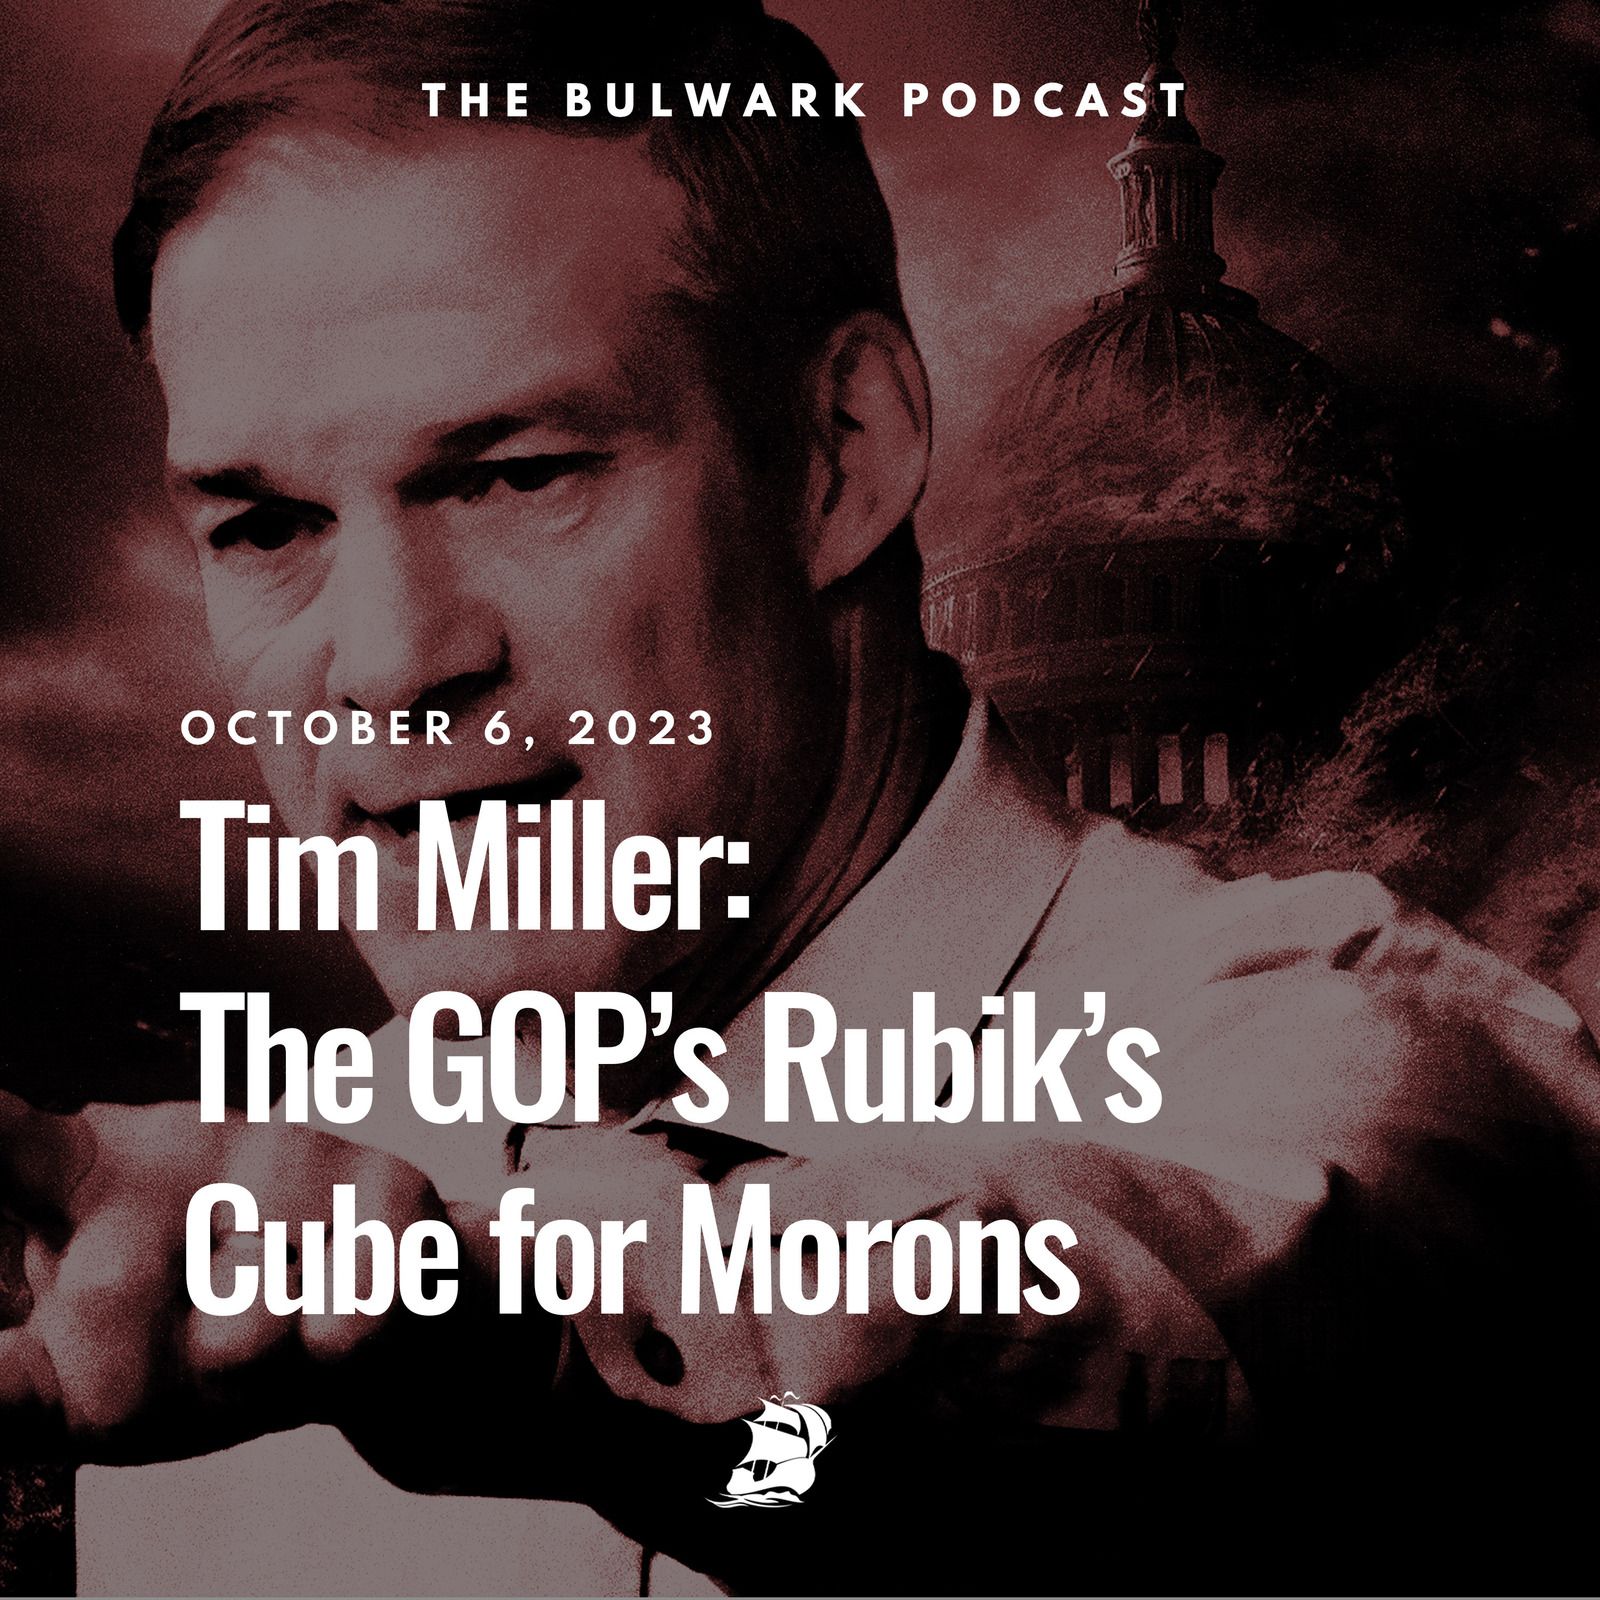 The GOP’s Rubik’s Cube for Morons